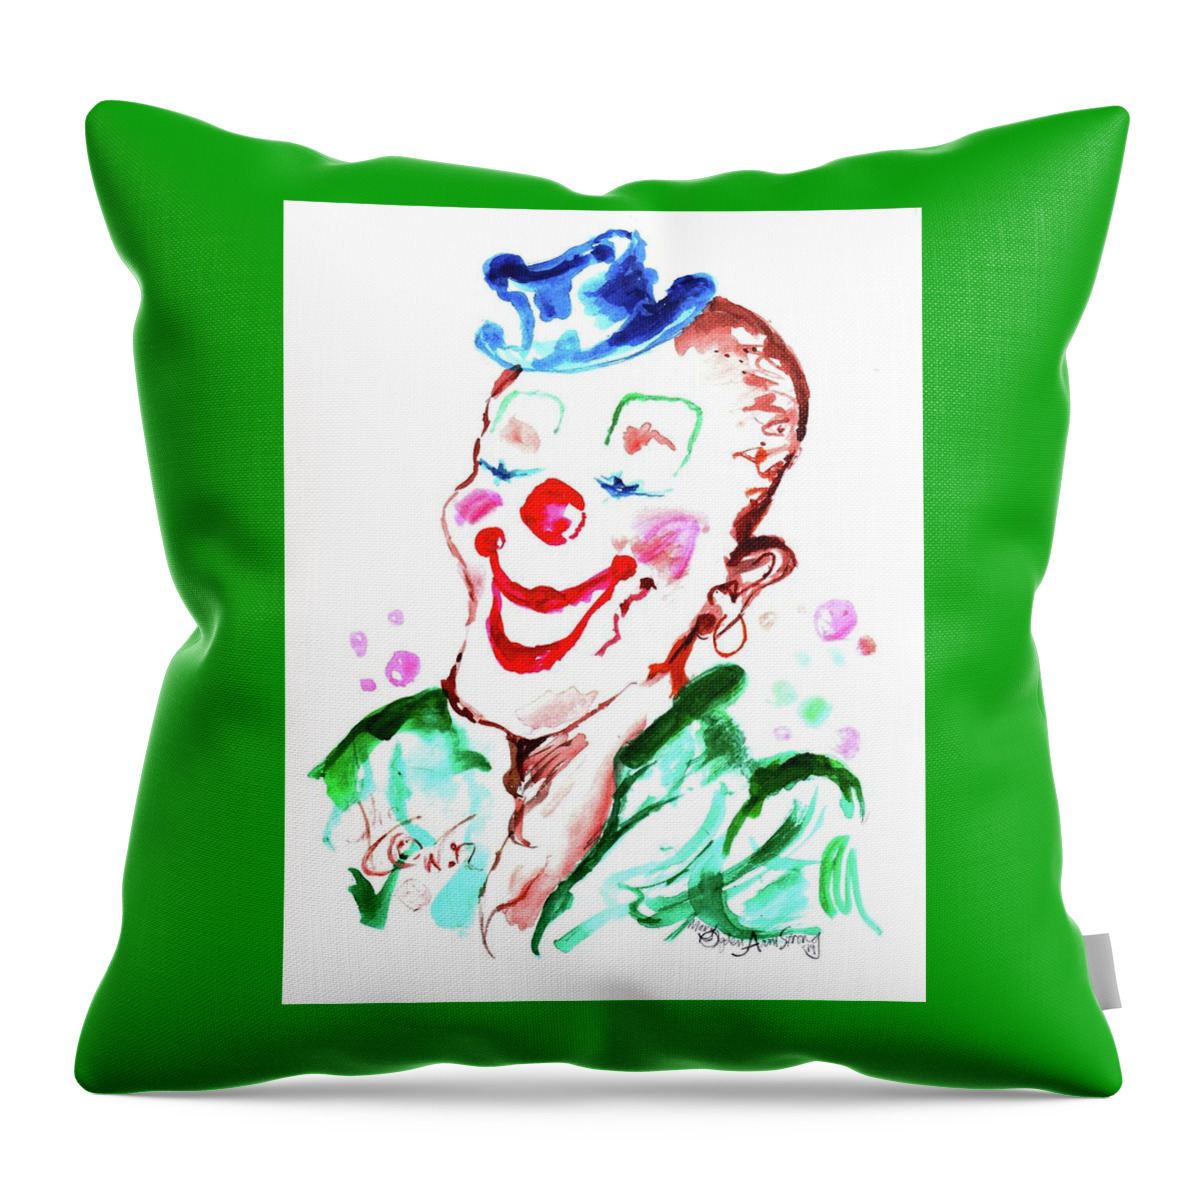 Clown Throw Pillow featuring the painting Happy Clown by Mary Armstrong